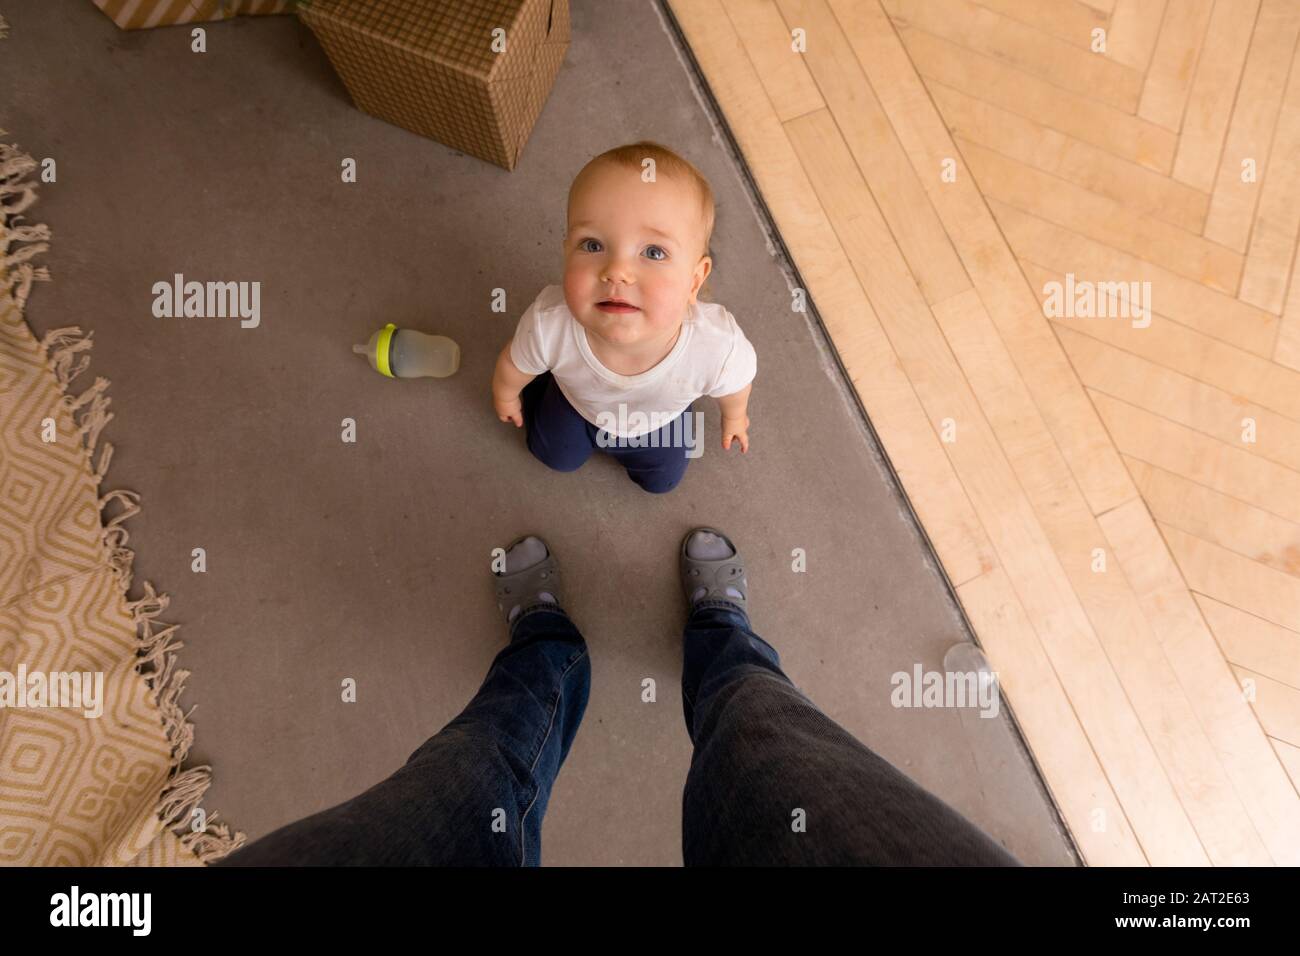 Cute toddler on floor at home Stock Photo